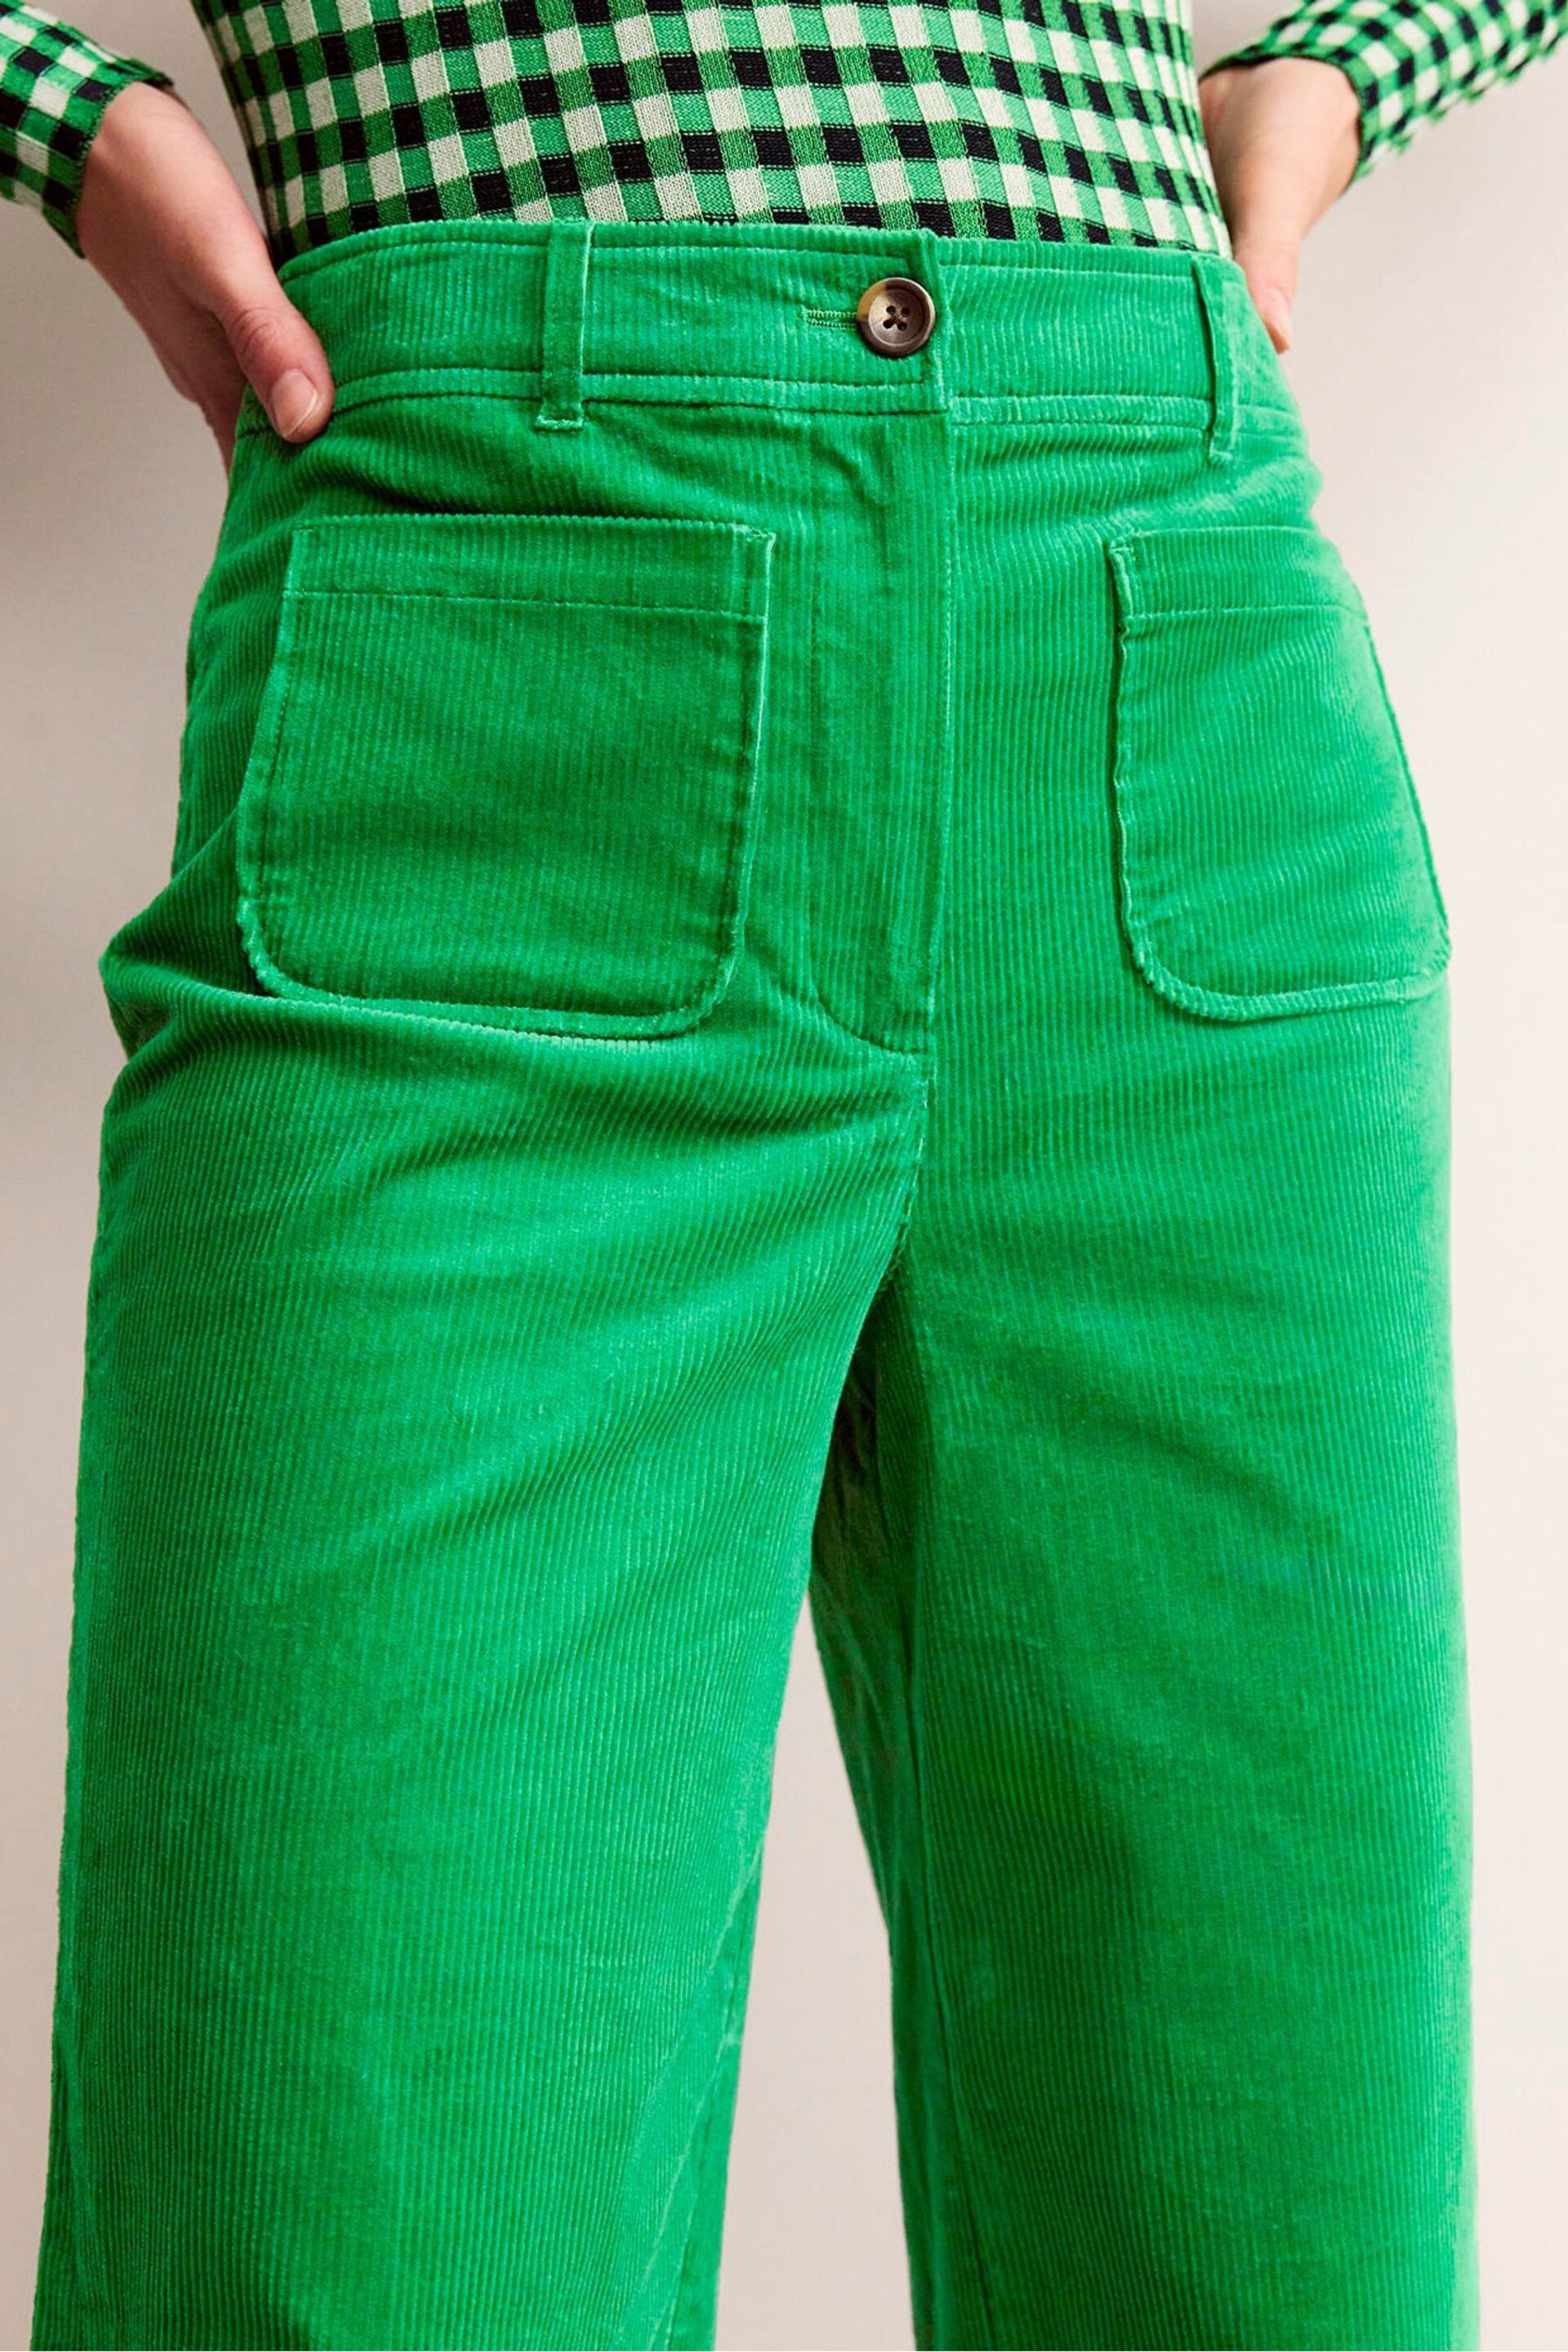 Boden Green Westbourne Corduroy Trousers - Image 3 of 4